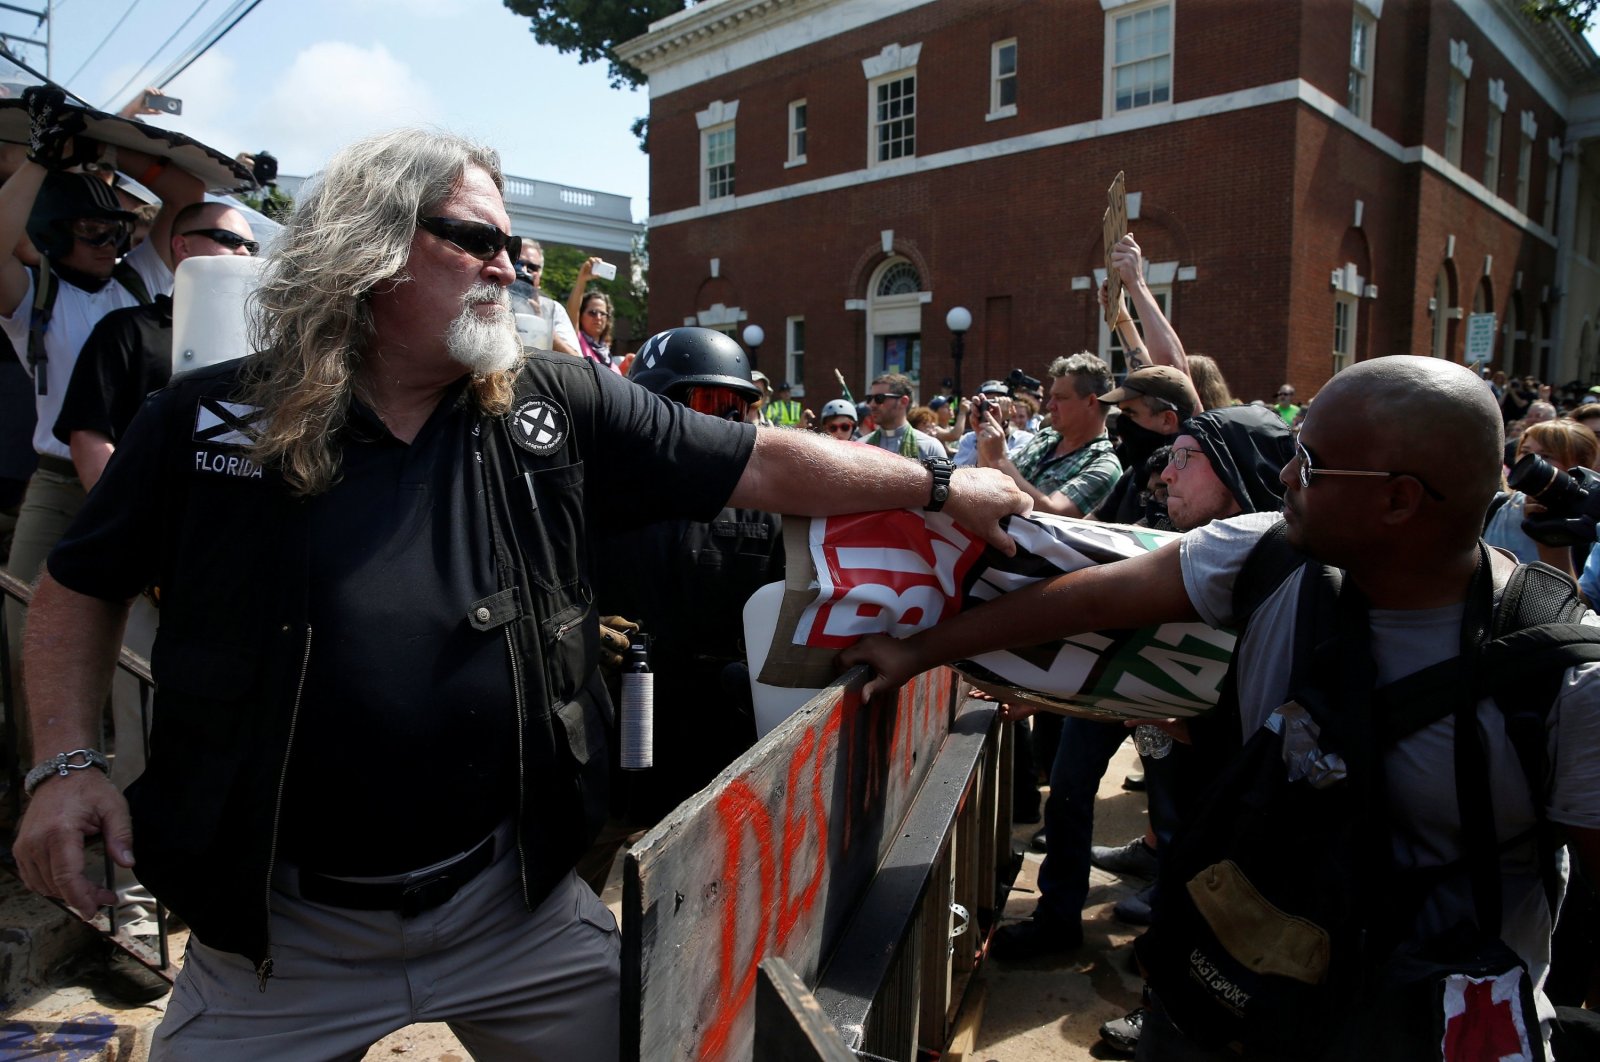 A white supremacist grabs a counter protesters' sign during a rally in Charlottesville, Virginia, U.S., Aug. 12, 2017. (Reuters Photo)